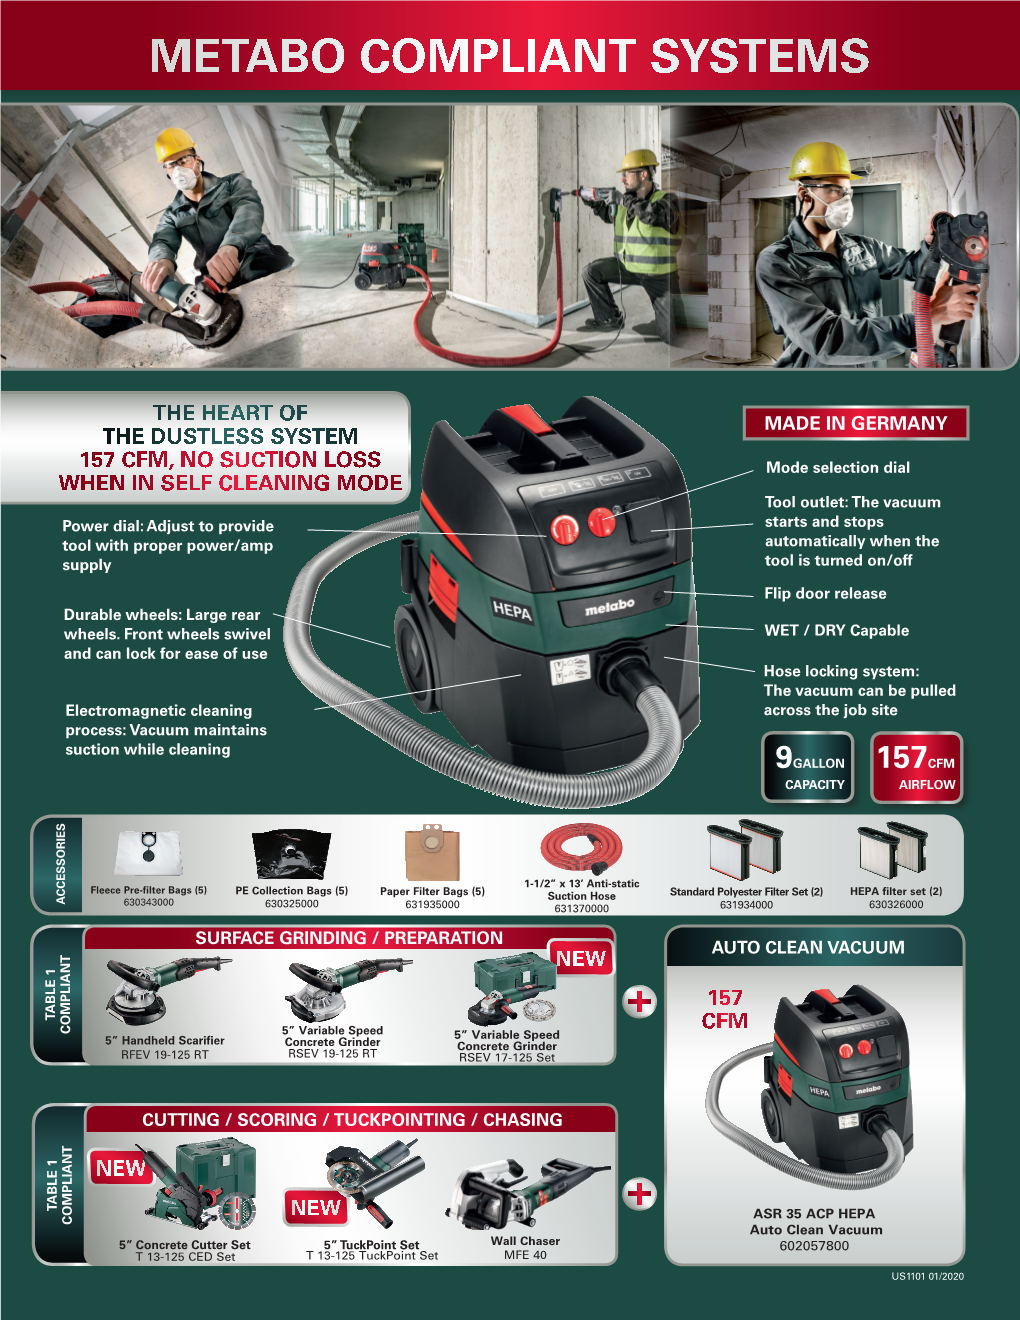 Metabo Compliant Systems